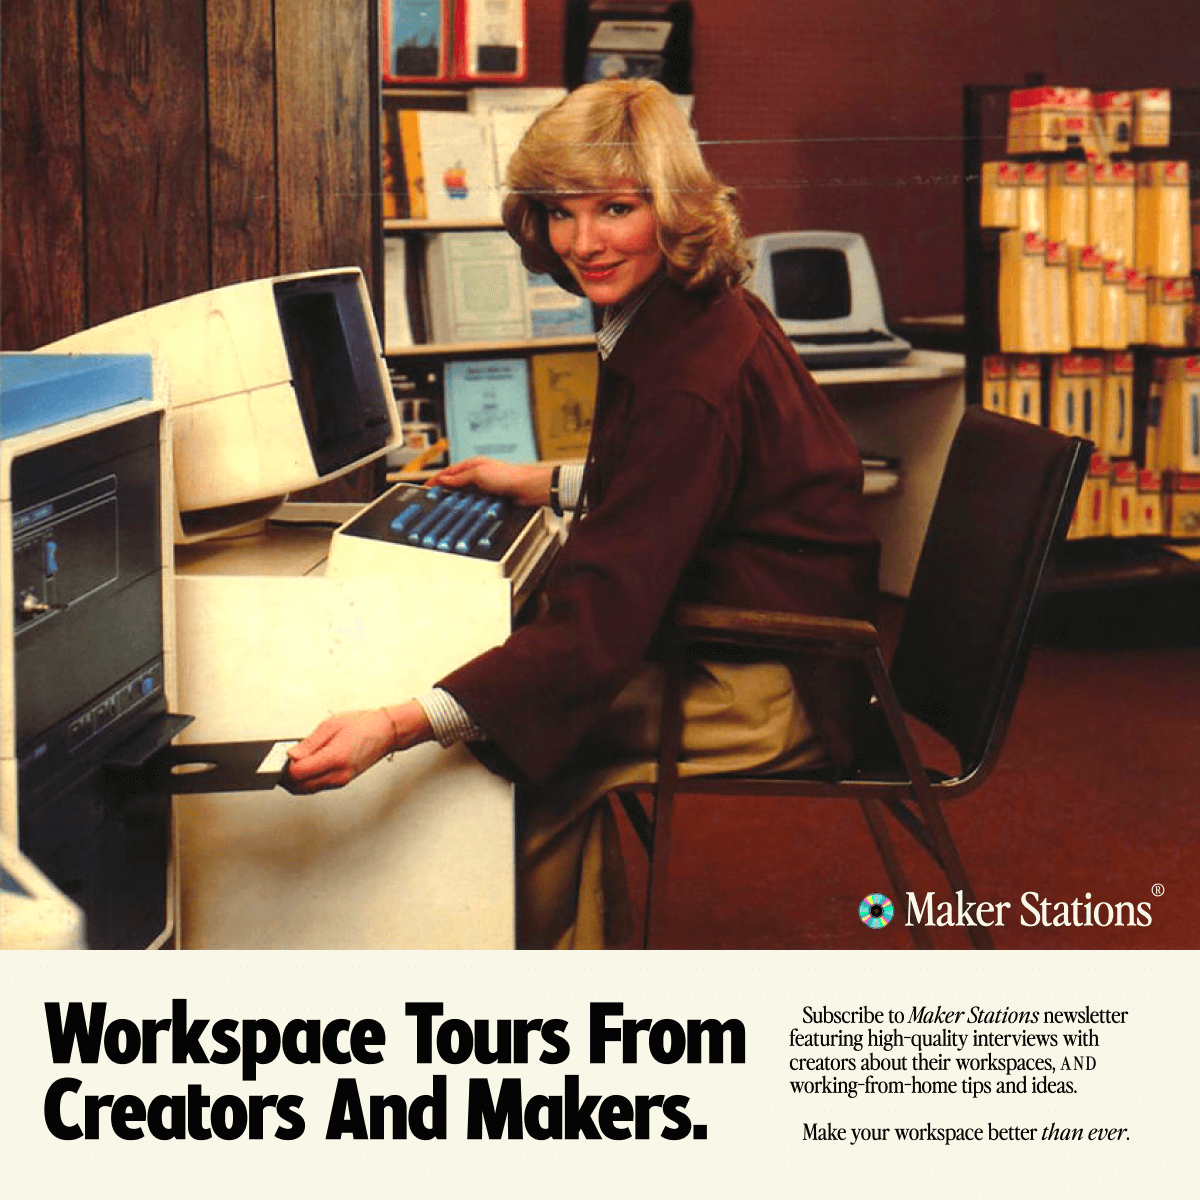 A retro ad for Maker Stations newsletter that features workspace tours from creators around the globe